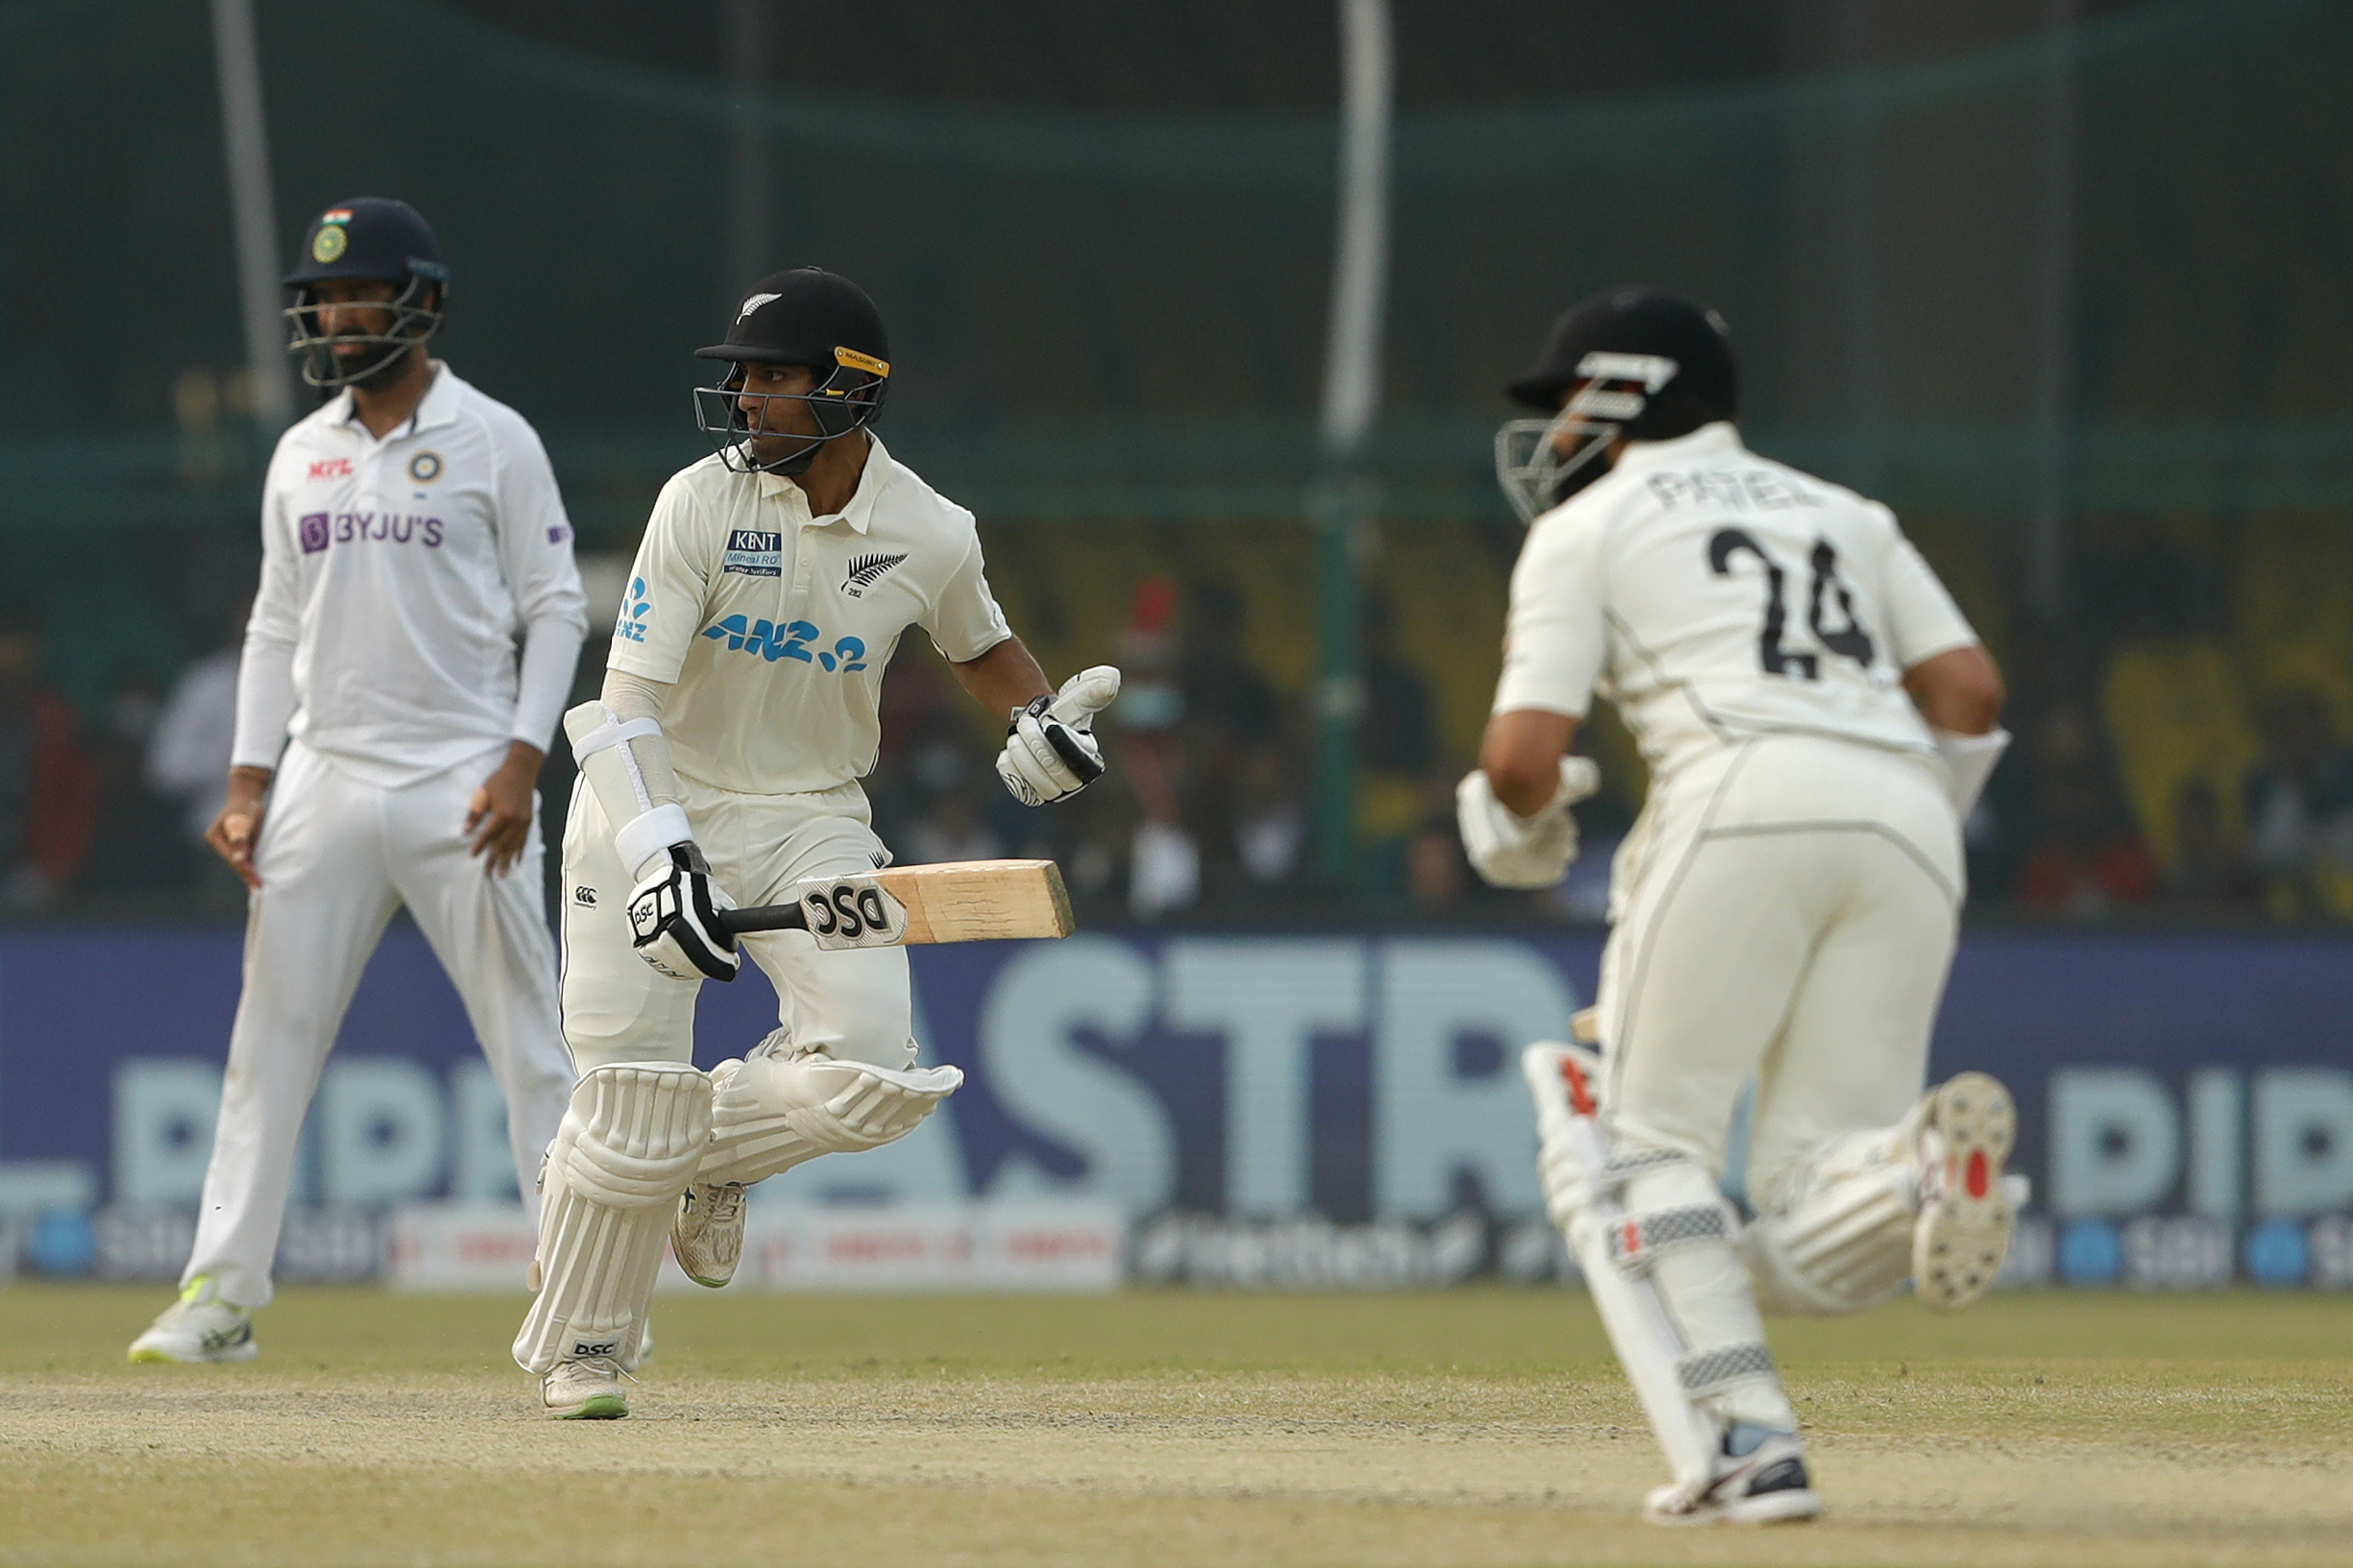 IND vs NZ | It’s the kind of stuff you dream about as a kid, says Rachin Ravindra after debut heroics